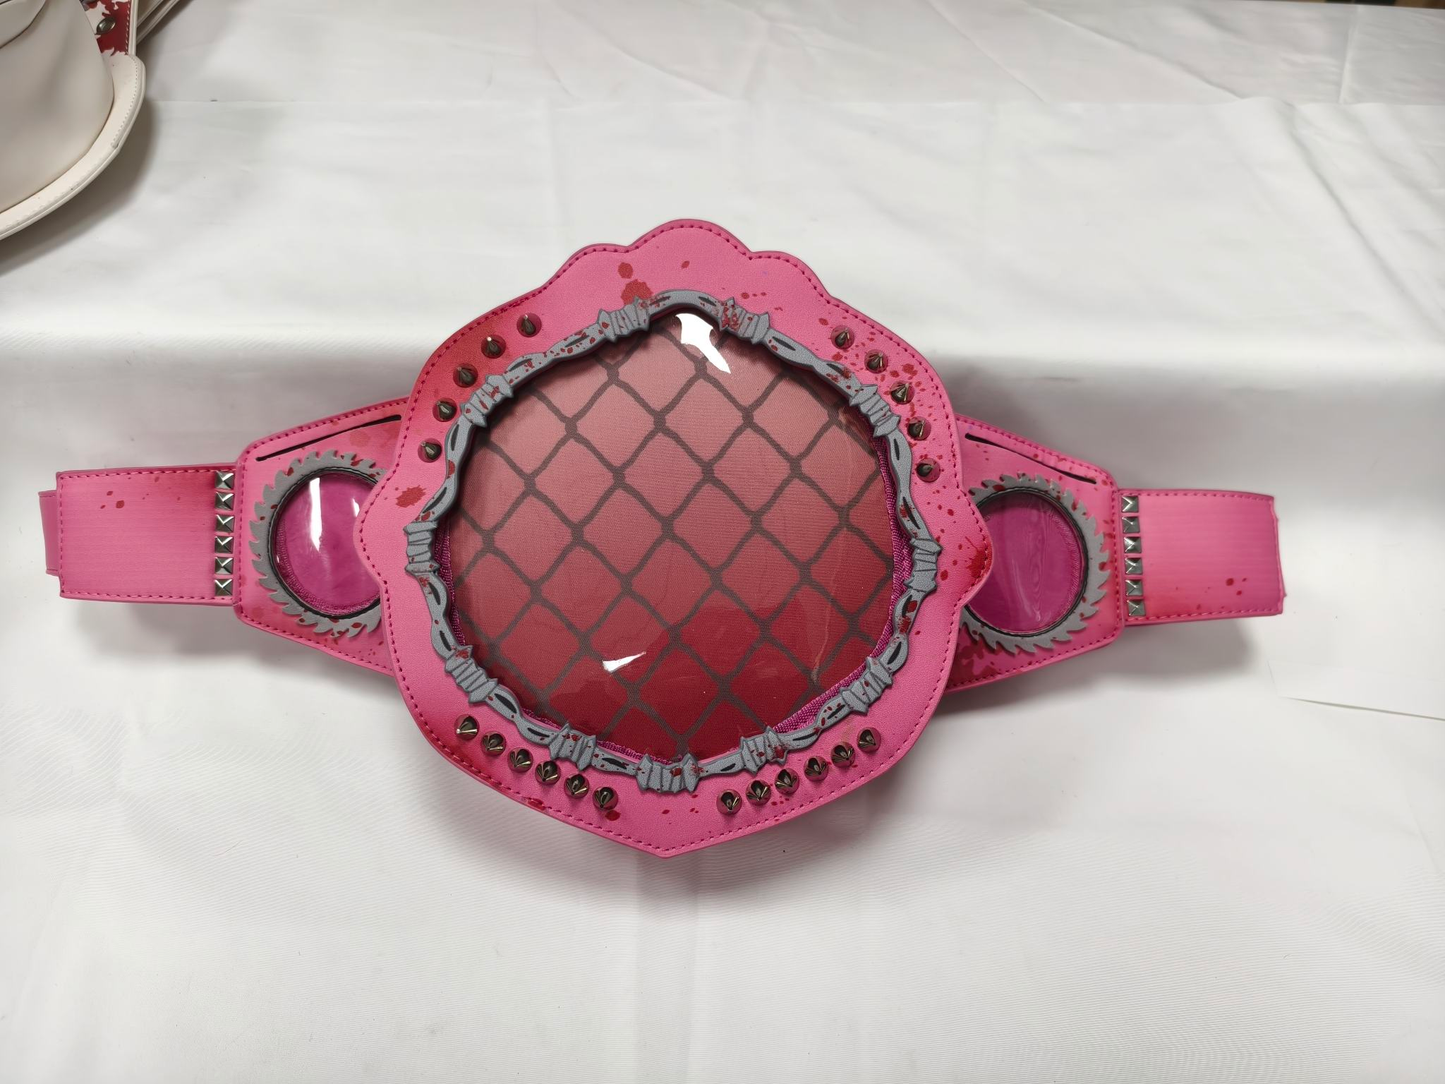 Pro Wrestling Hardcore Championship Ita Bag Fanny Pack (PREORDER, ships late March)